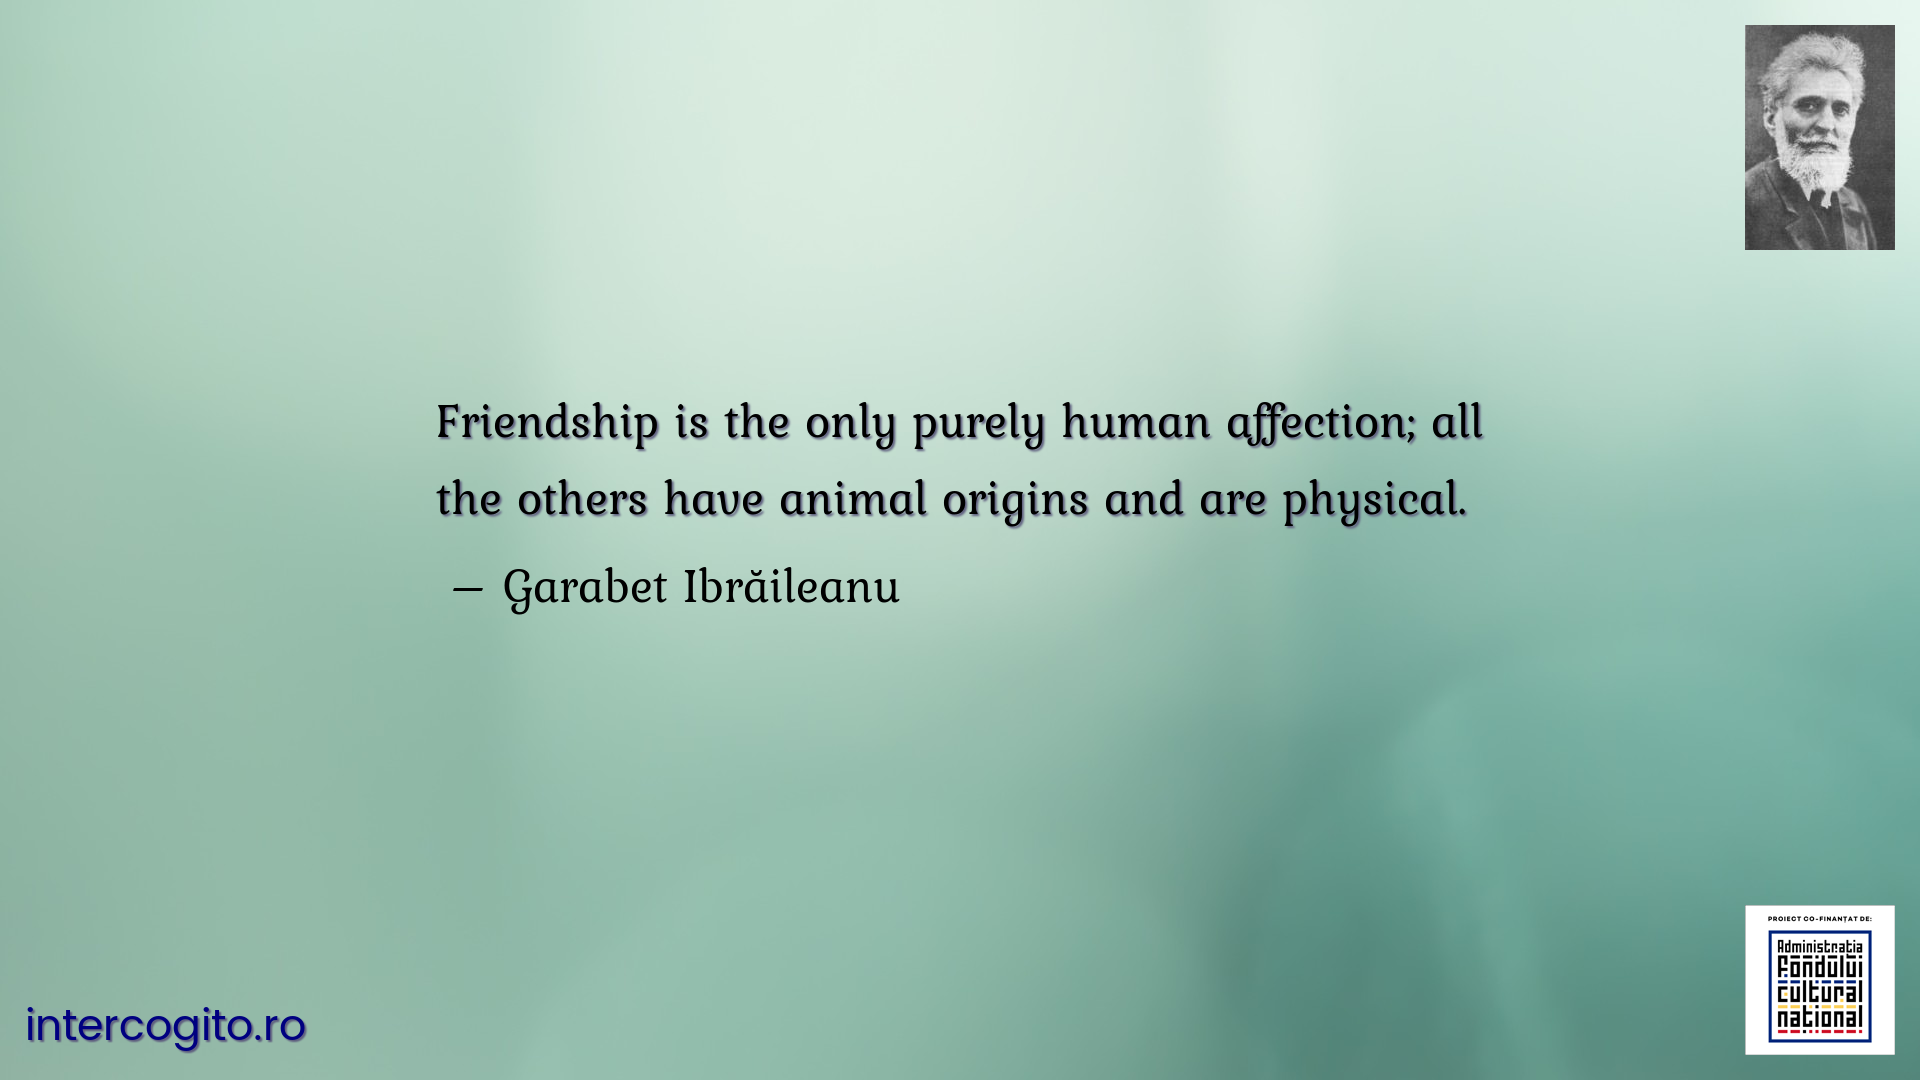 Friendship is the only purely human affection; all the others have animal origins and are physical.